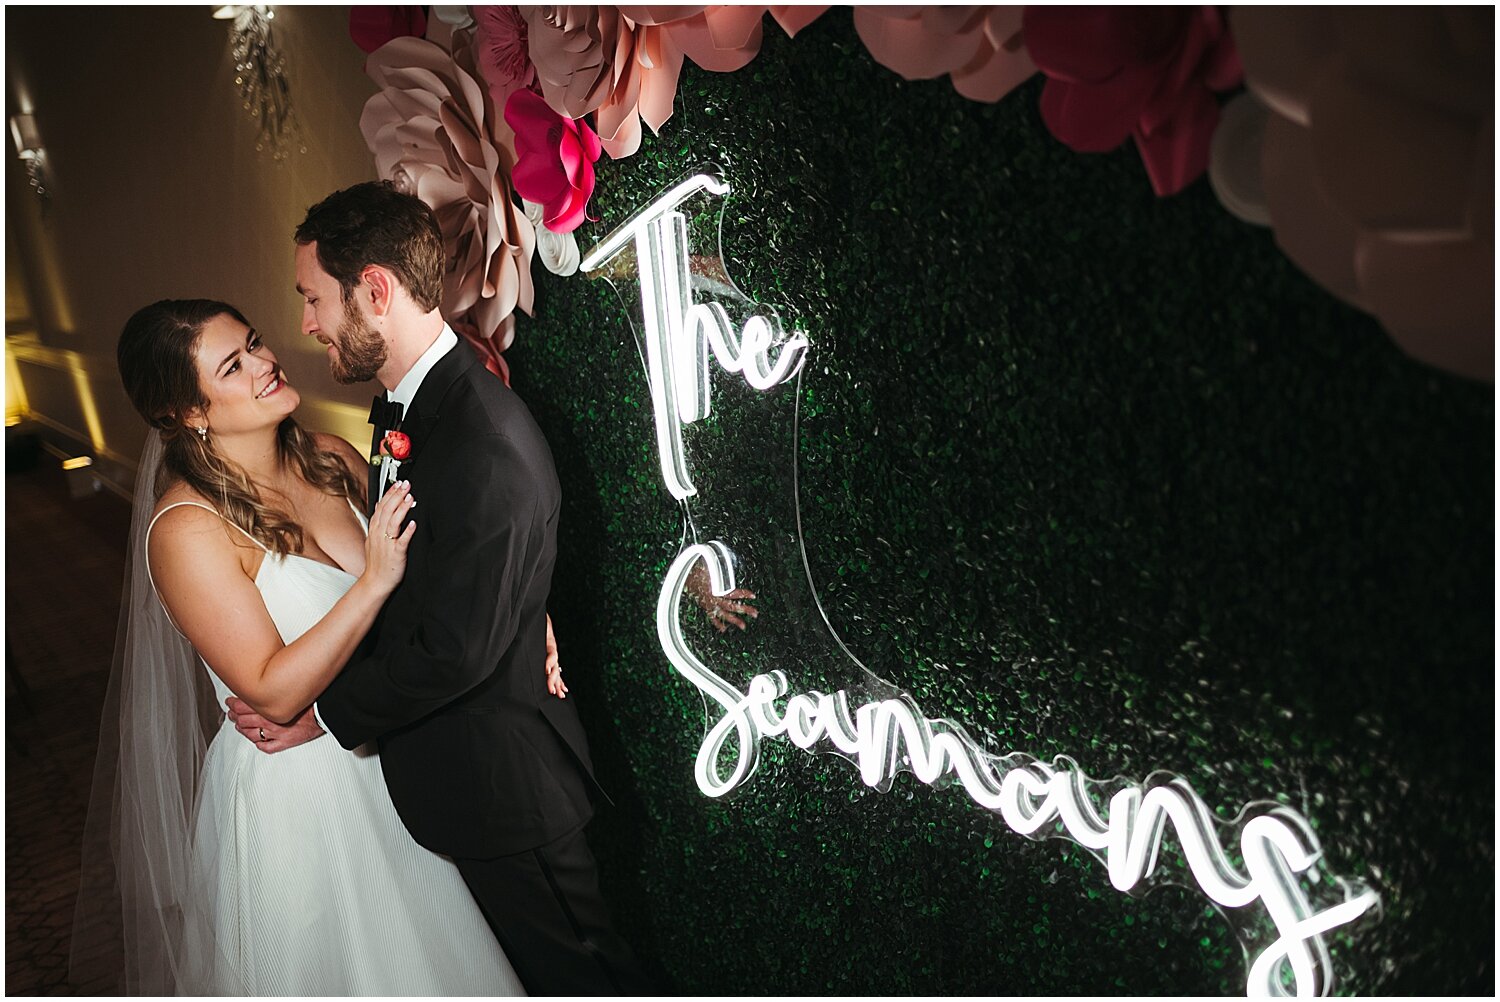  bride and groom portrait by the neon sign and greenery backdrop 